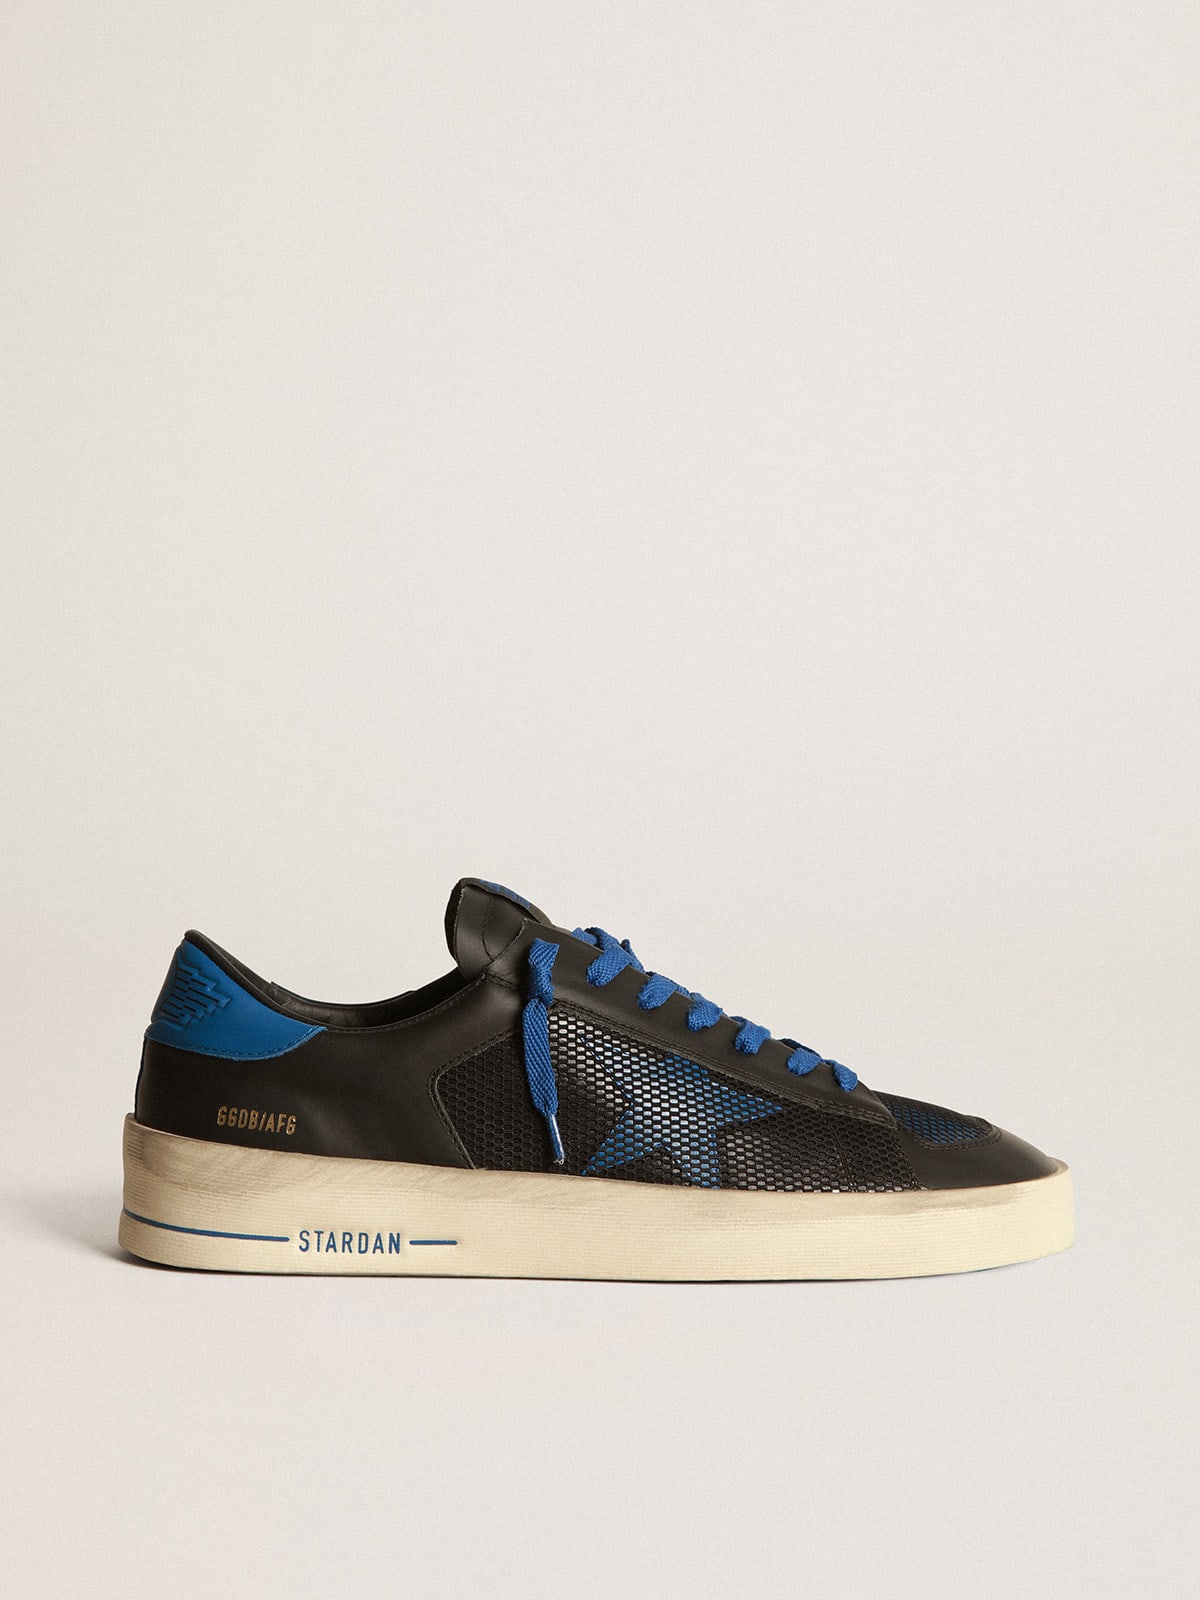 Stardan sneakers in black and light blue leather with black mesh inserts and a light blue leather star